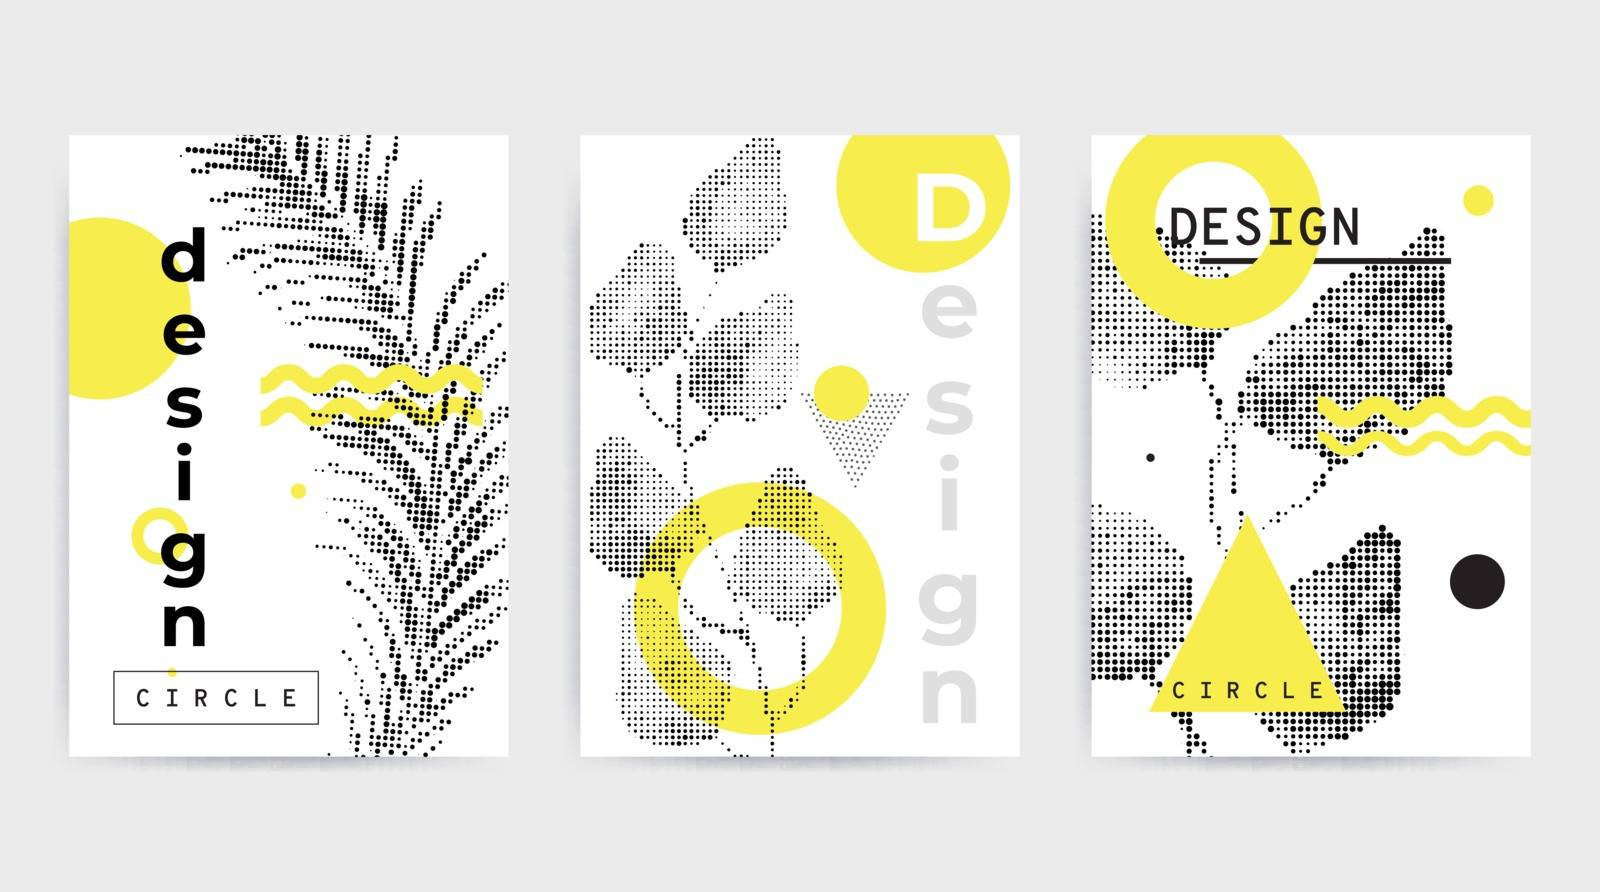 Universal trend posters set juxtaposed with bright bold geometric leaves foliage yellow elements composition. Background in restrained sustained tempered style. Magazine, leaflet, billboard, sale